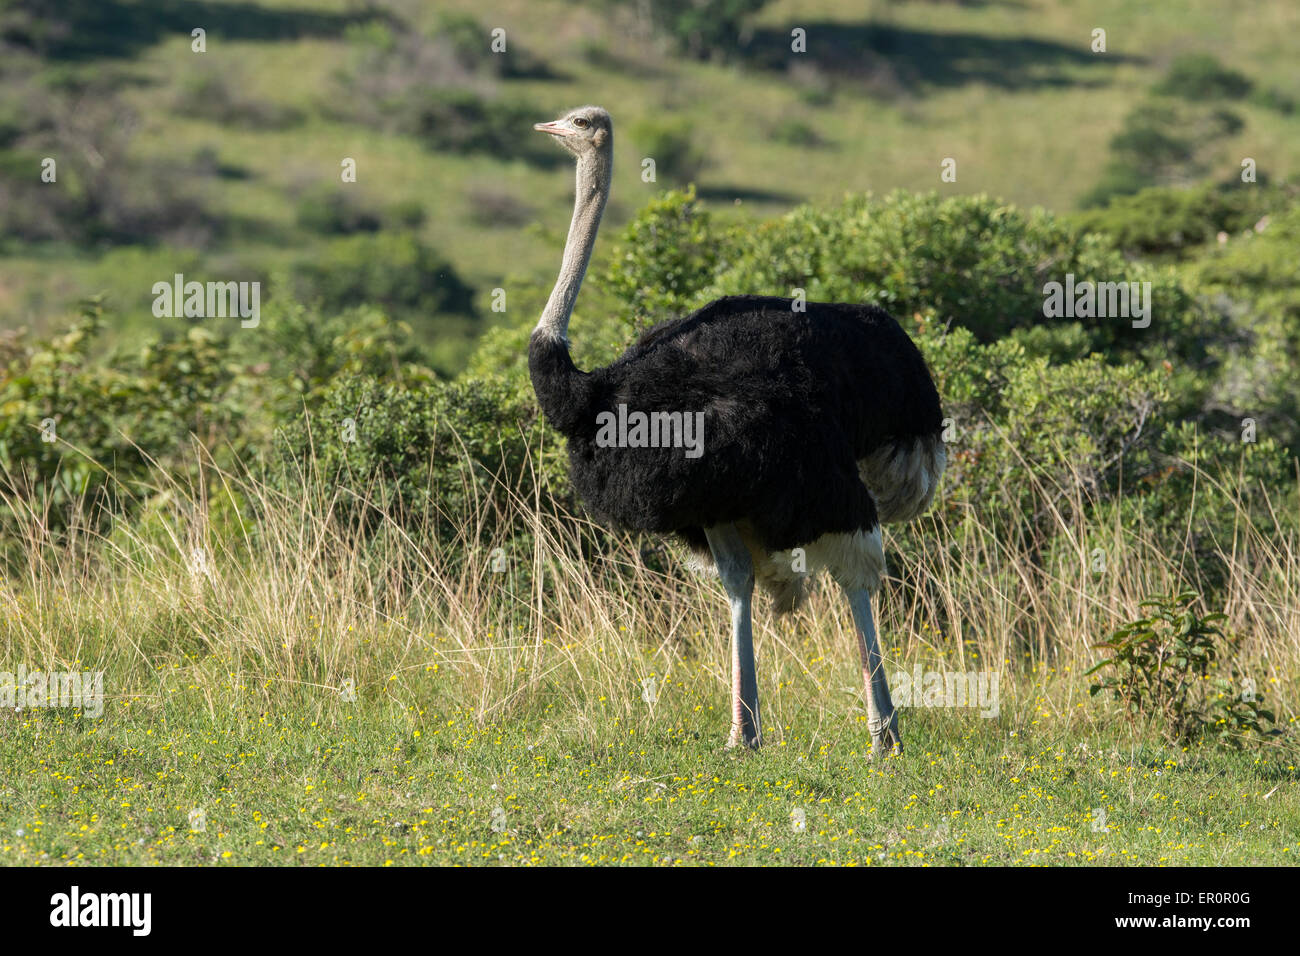 South Africa, Eastern Cape, East London. Inkwenkwezi Game Reserve. Ostrich (WILD: Struthio camelus), male in grassland habitat. Stock Photo